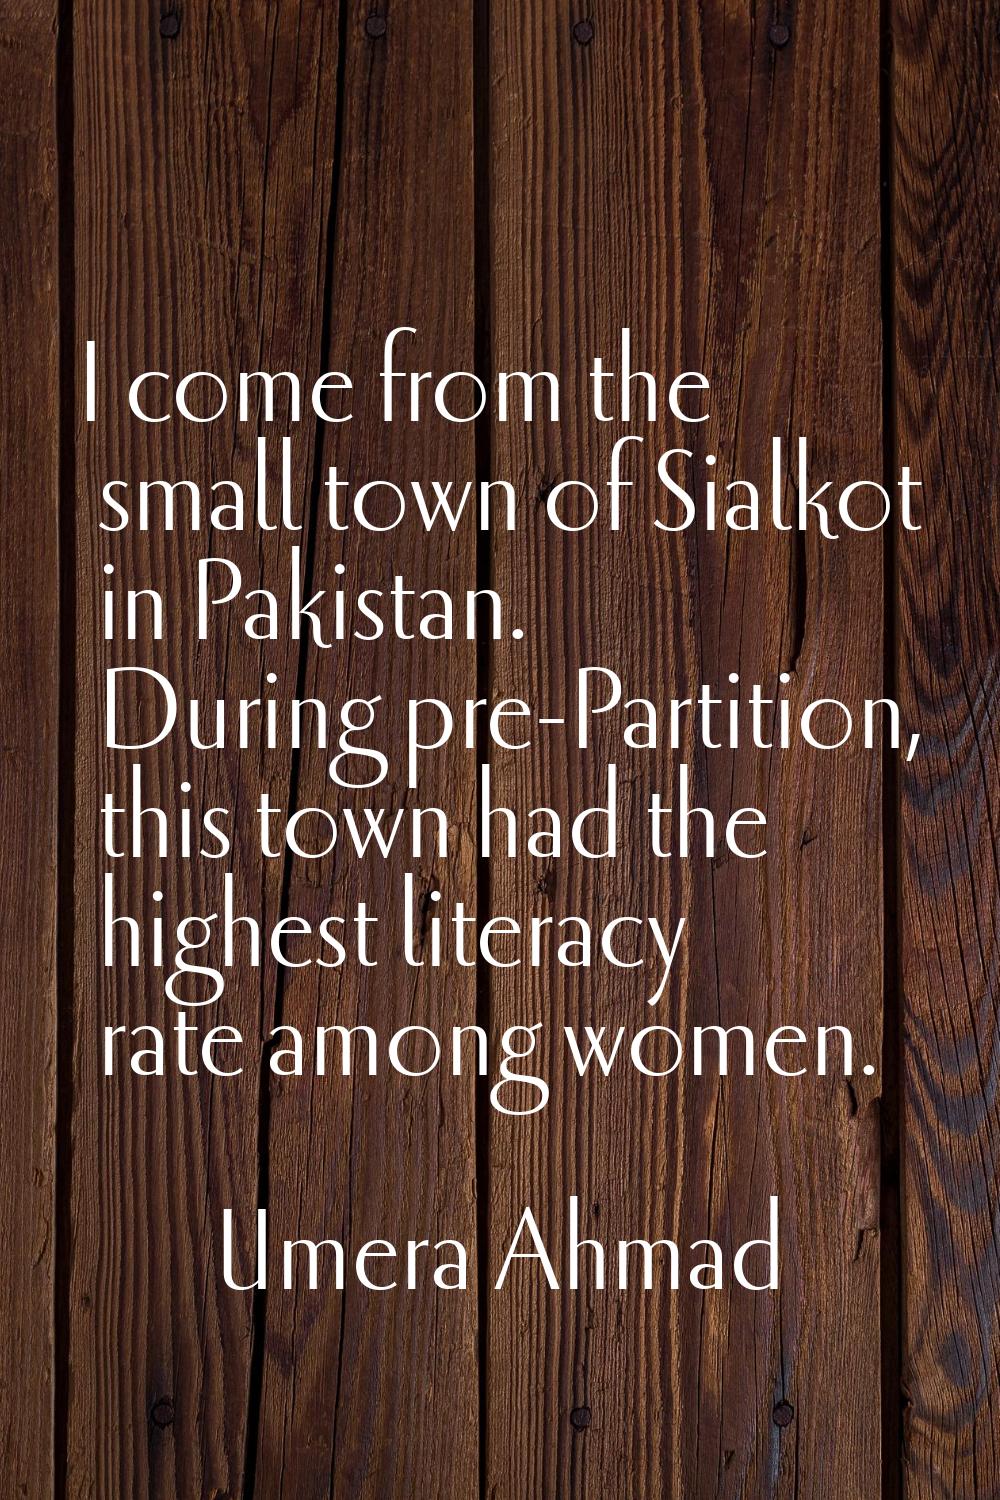 I come from the small town of Sialkot in Pakistan. During pre-Partition, this town had the highest 